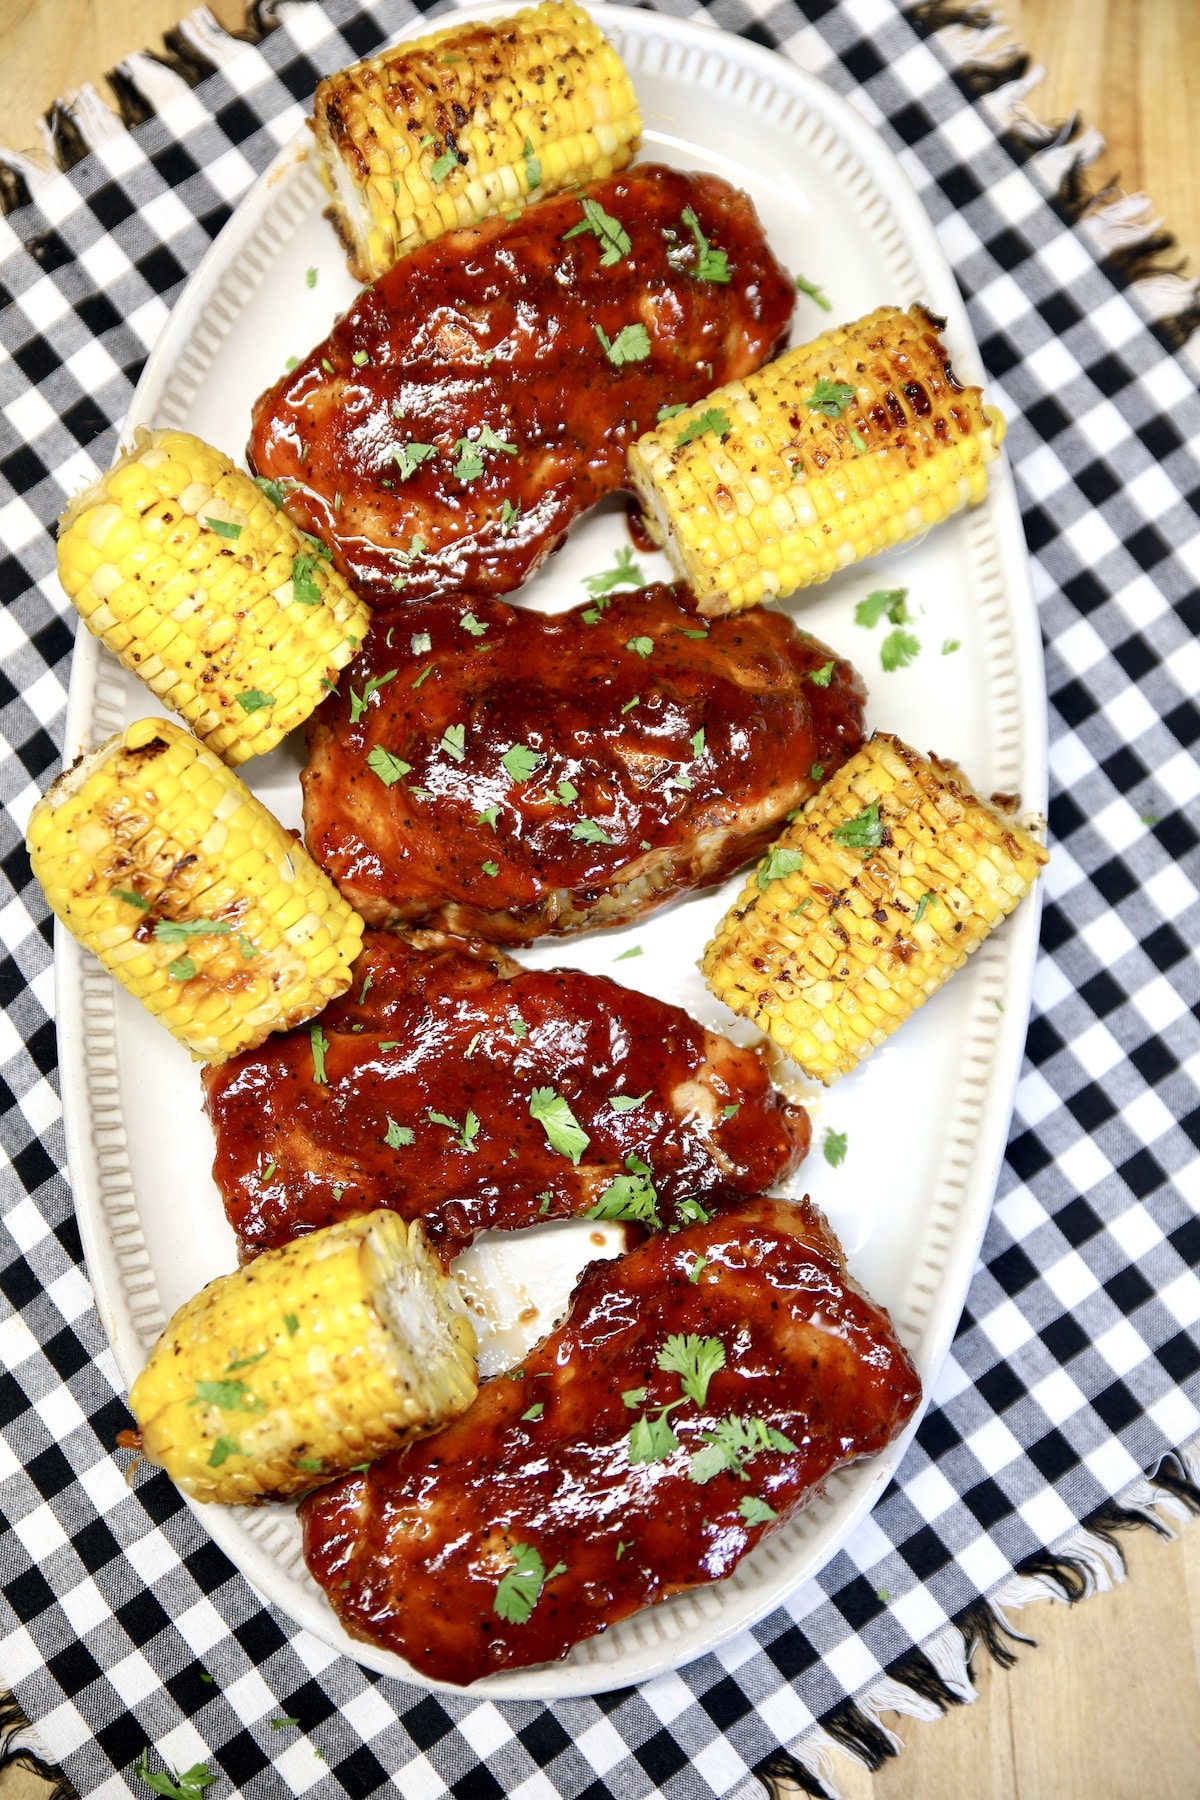 Platter of bbq pork chops and corn on the cob.